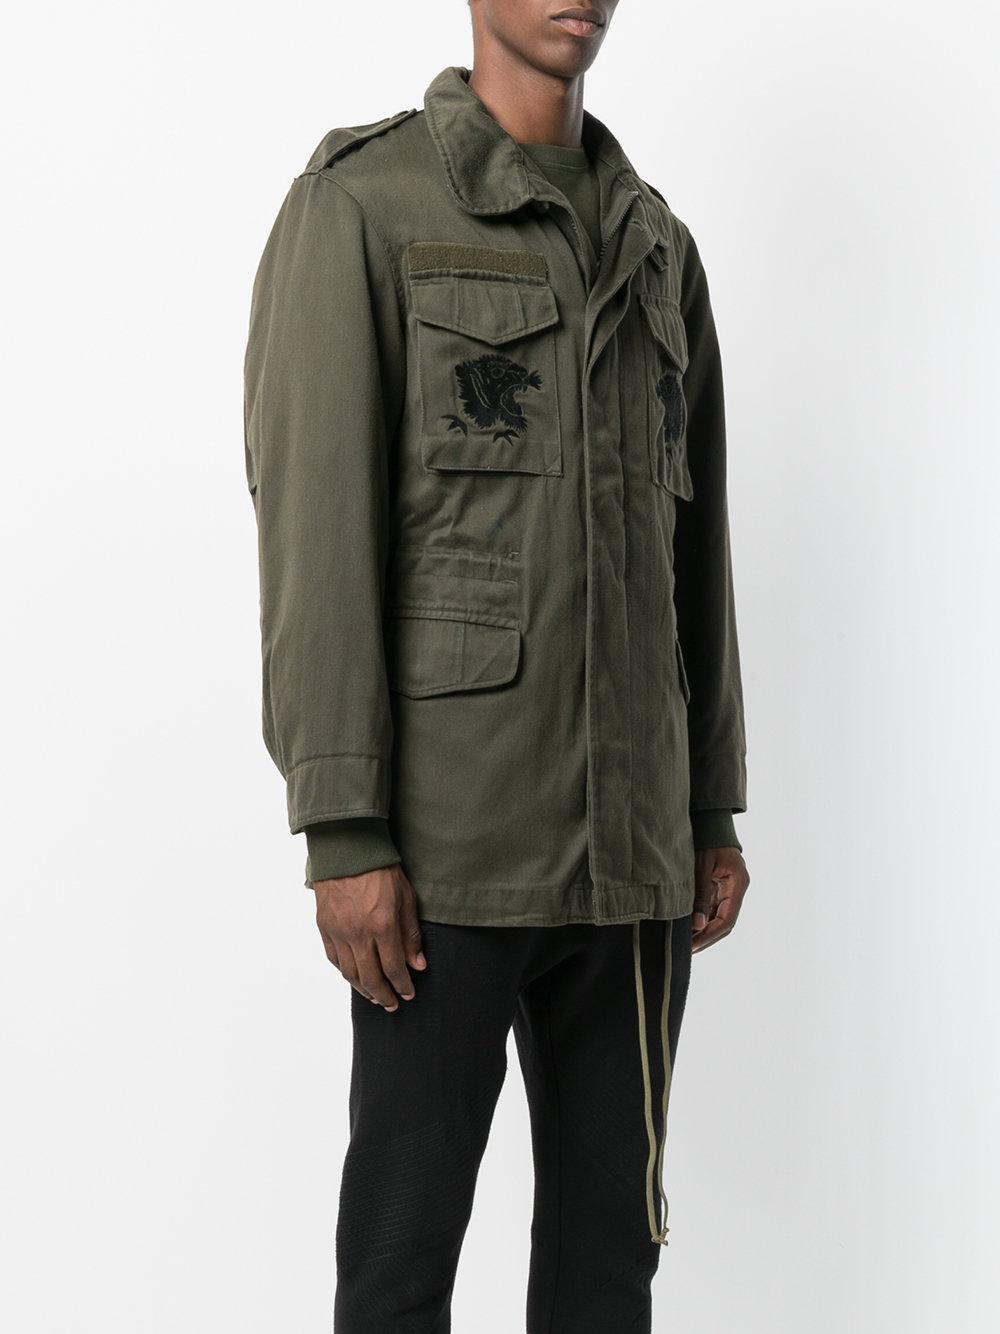 Maharishi Embroidered Military Jacket in Green for Men - Lyst